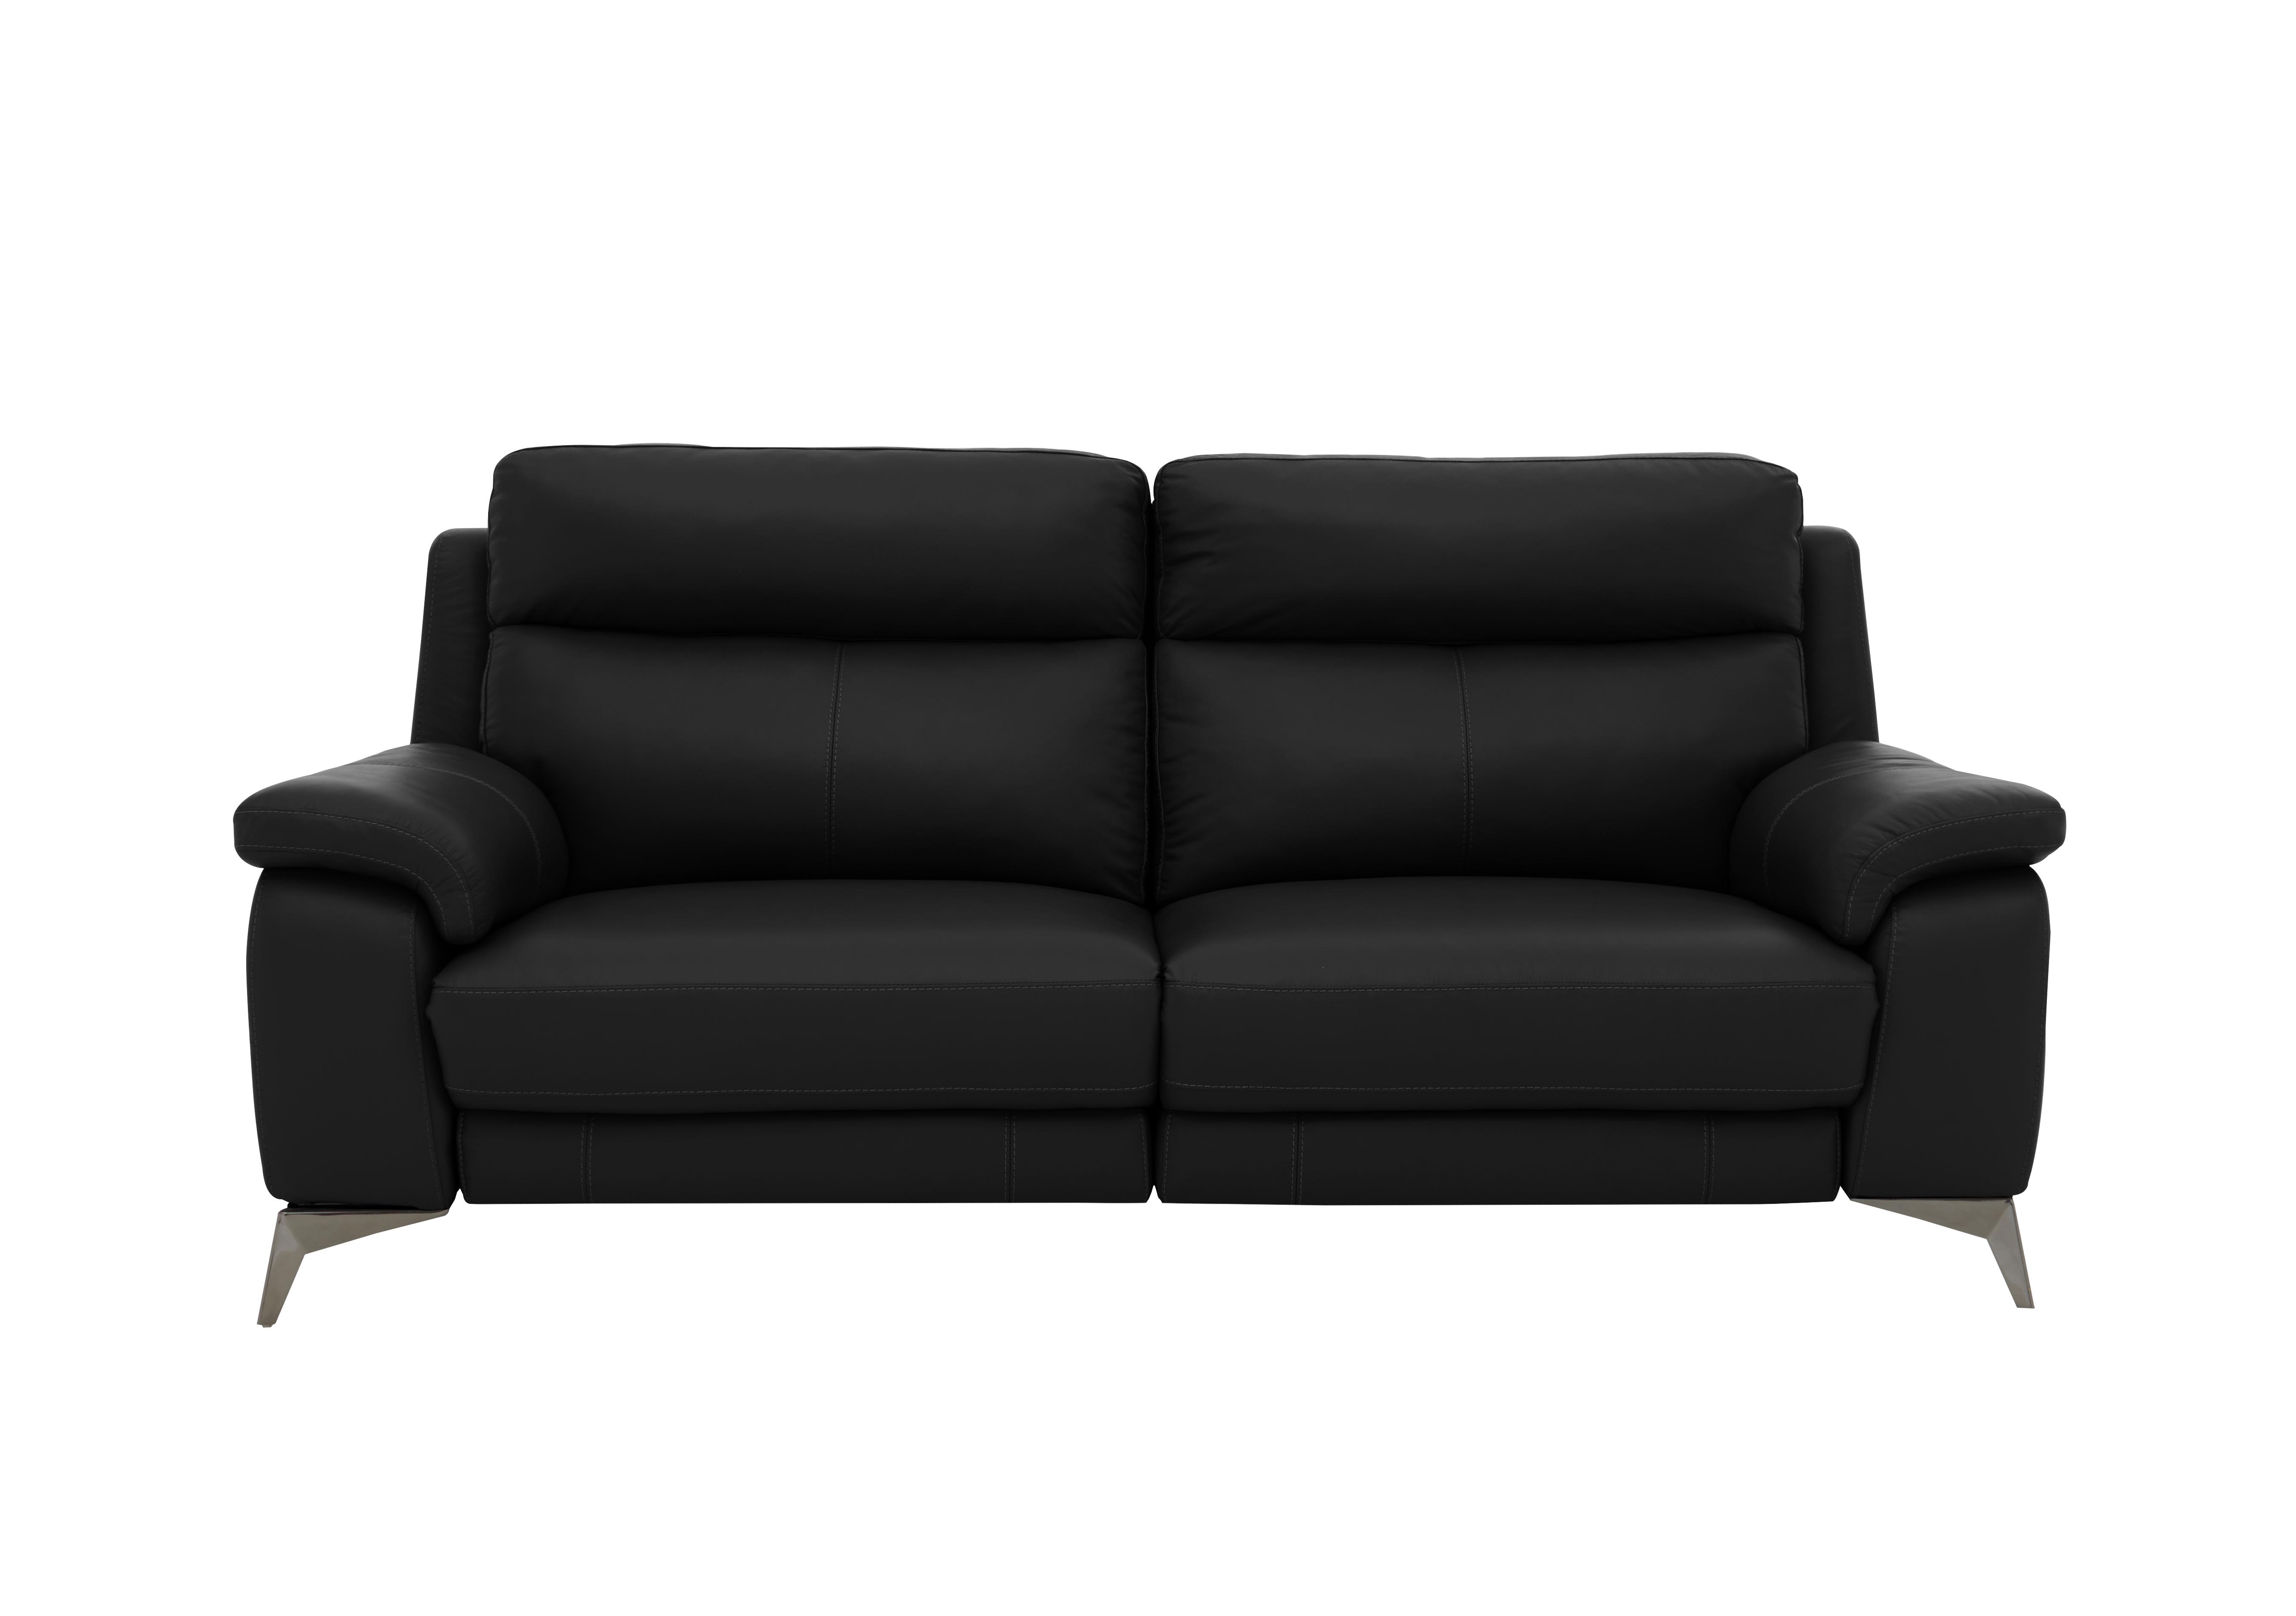 Missouri 3 Seater Leather Recliner Sofa with Power Headrest in Bv-3500 Classic Black on Furniture Village